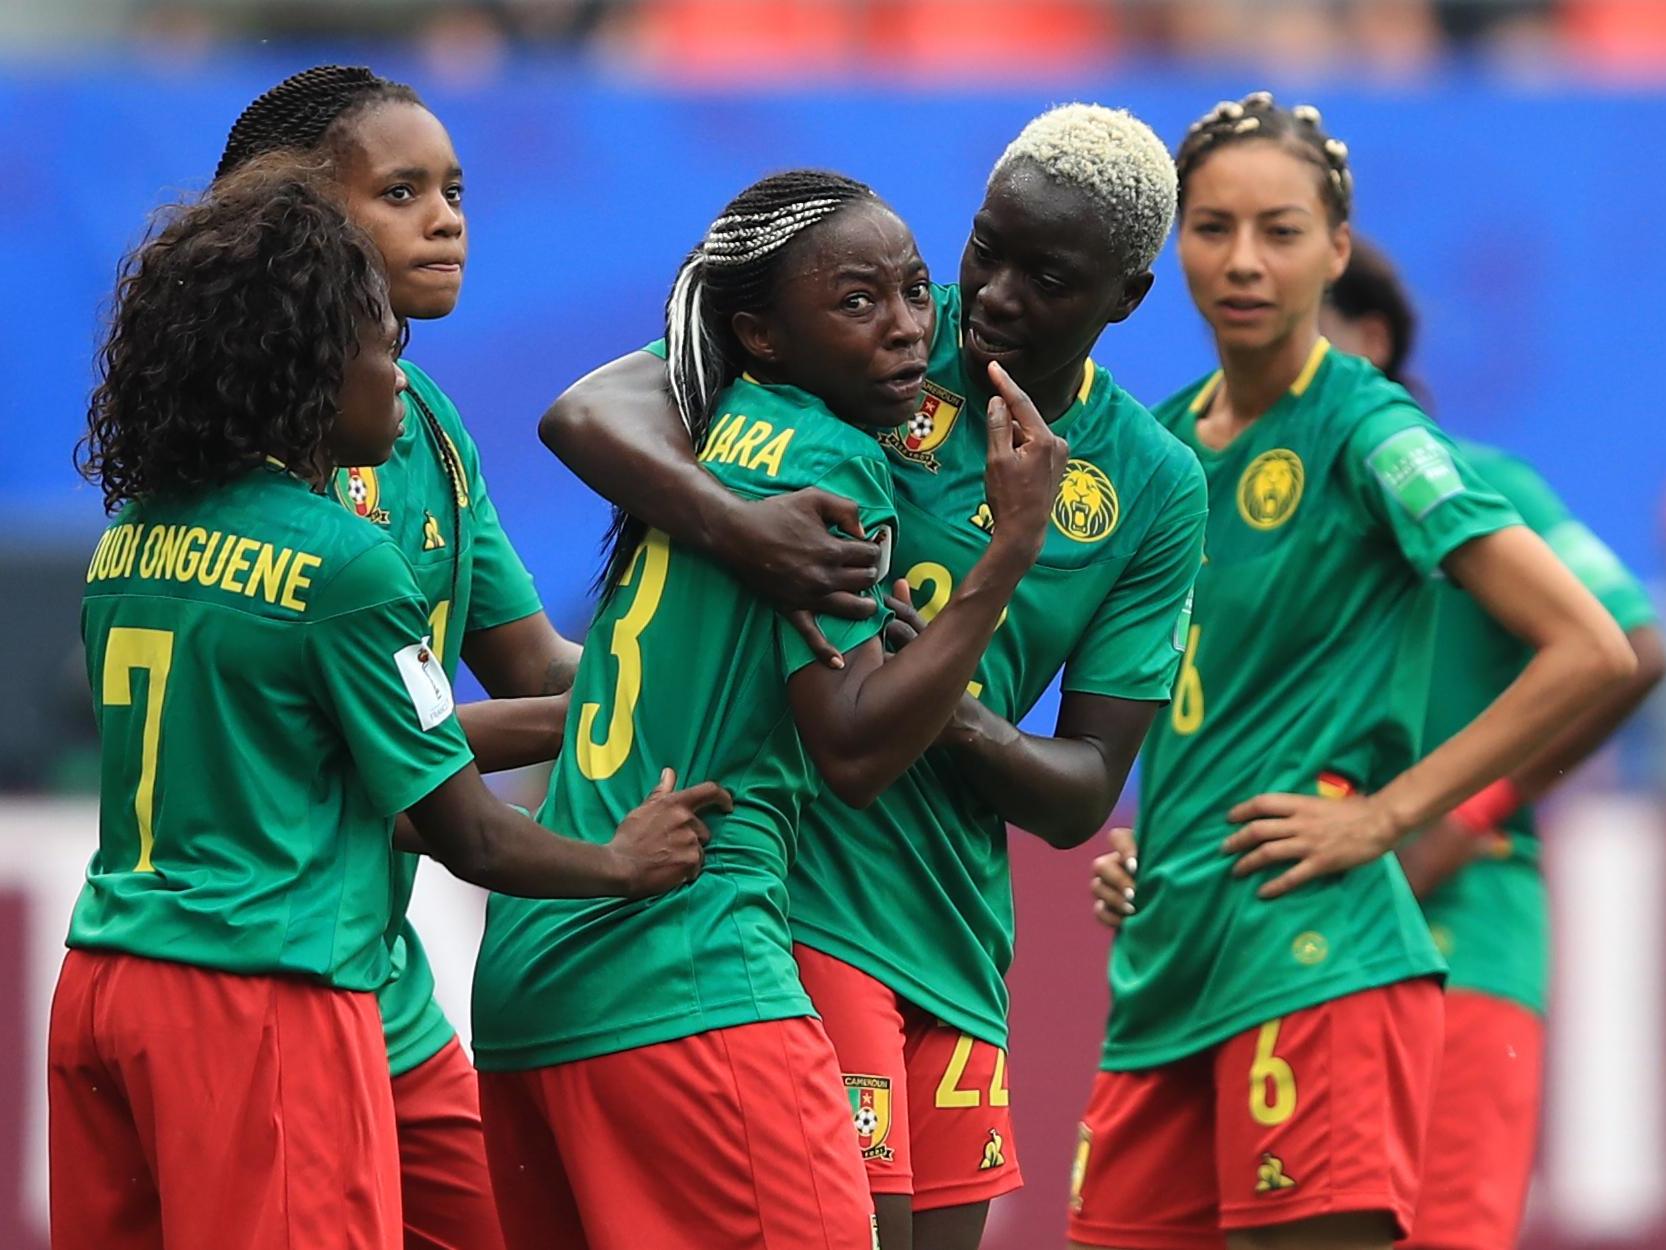 Cameroon's players were furious with the VAR decisions